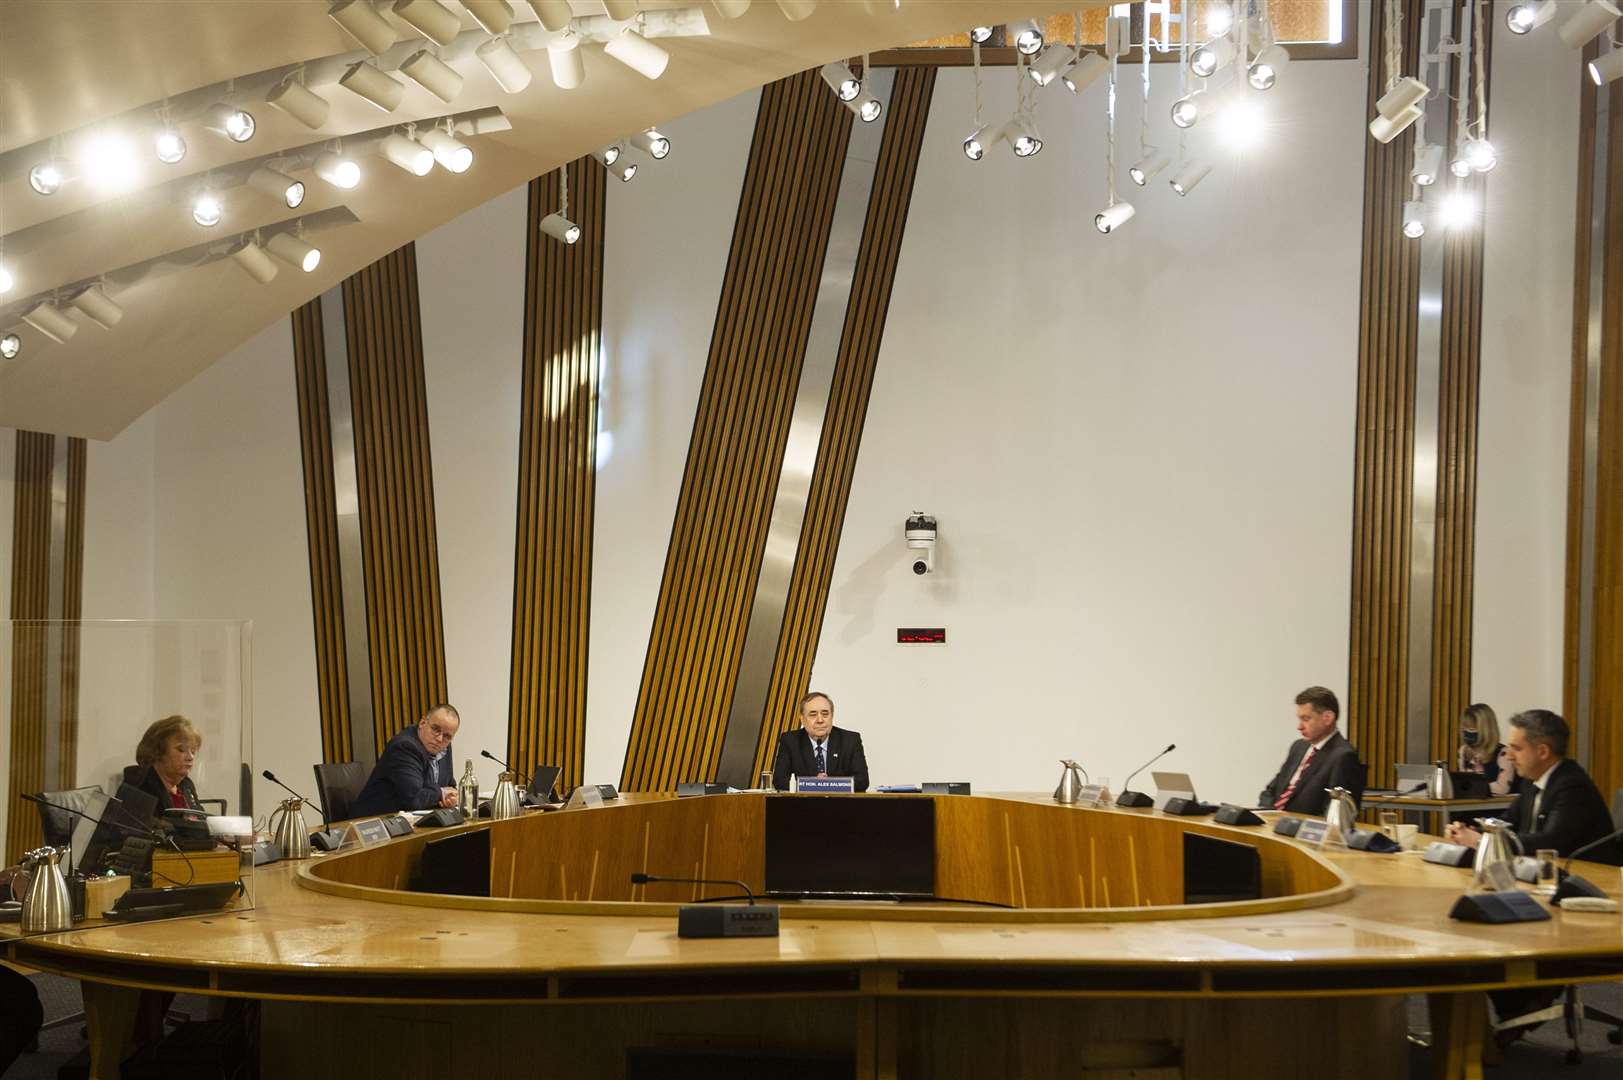 Mr Salmond, centre, is appearing in person before the Holyrood committee (Andy Buchanan/PA)